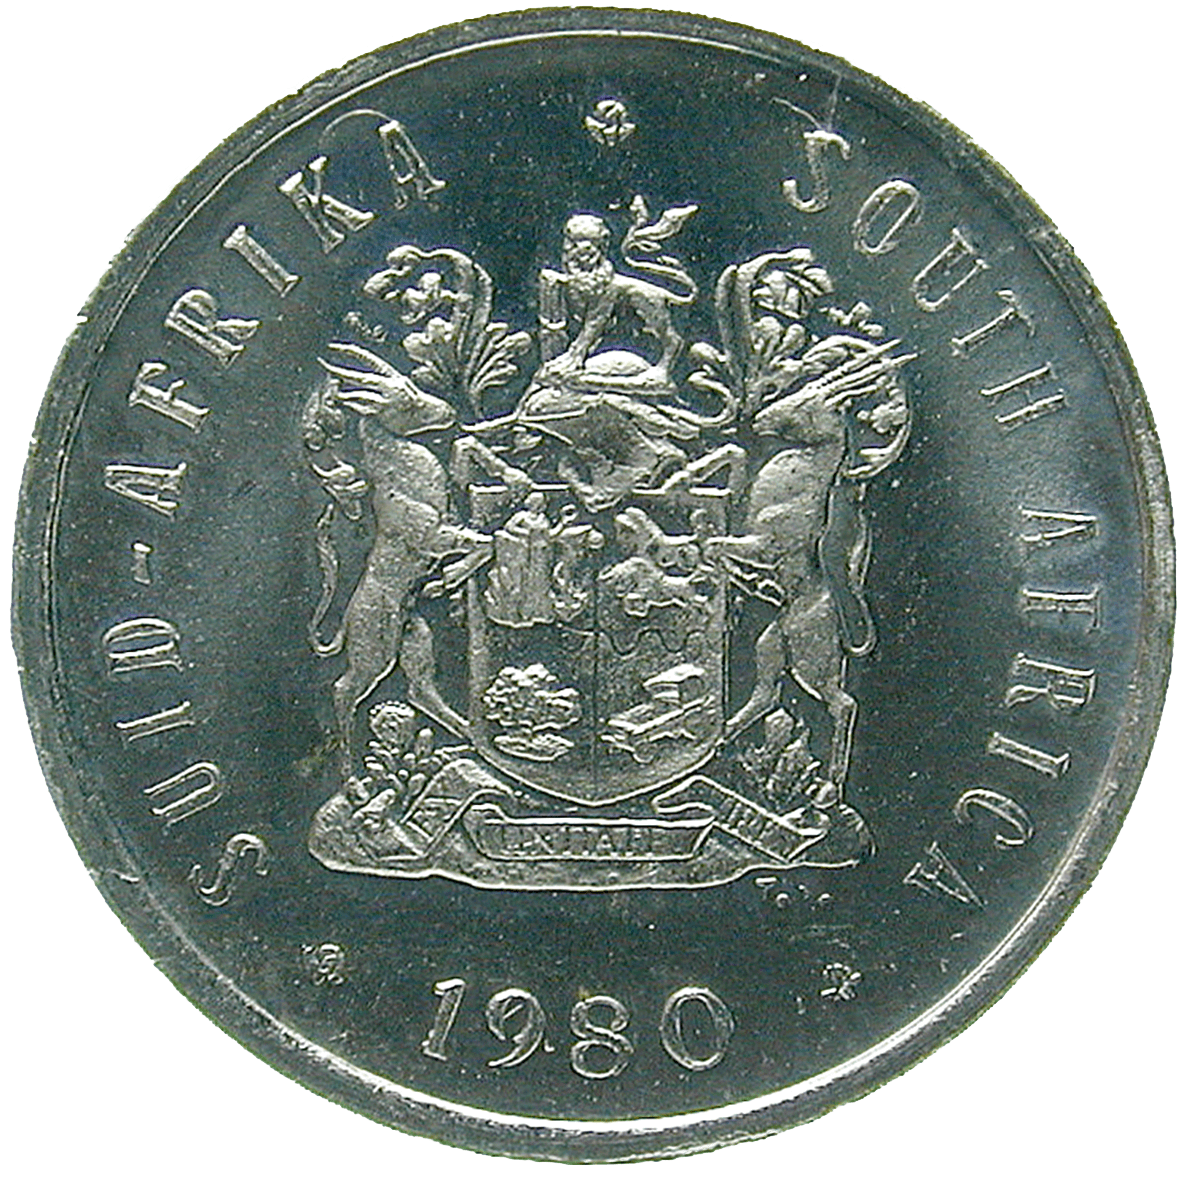 Republic of South Africa, 5 Cents 1980 (obverse)